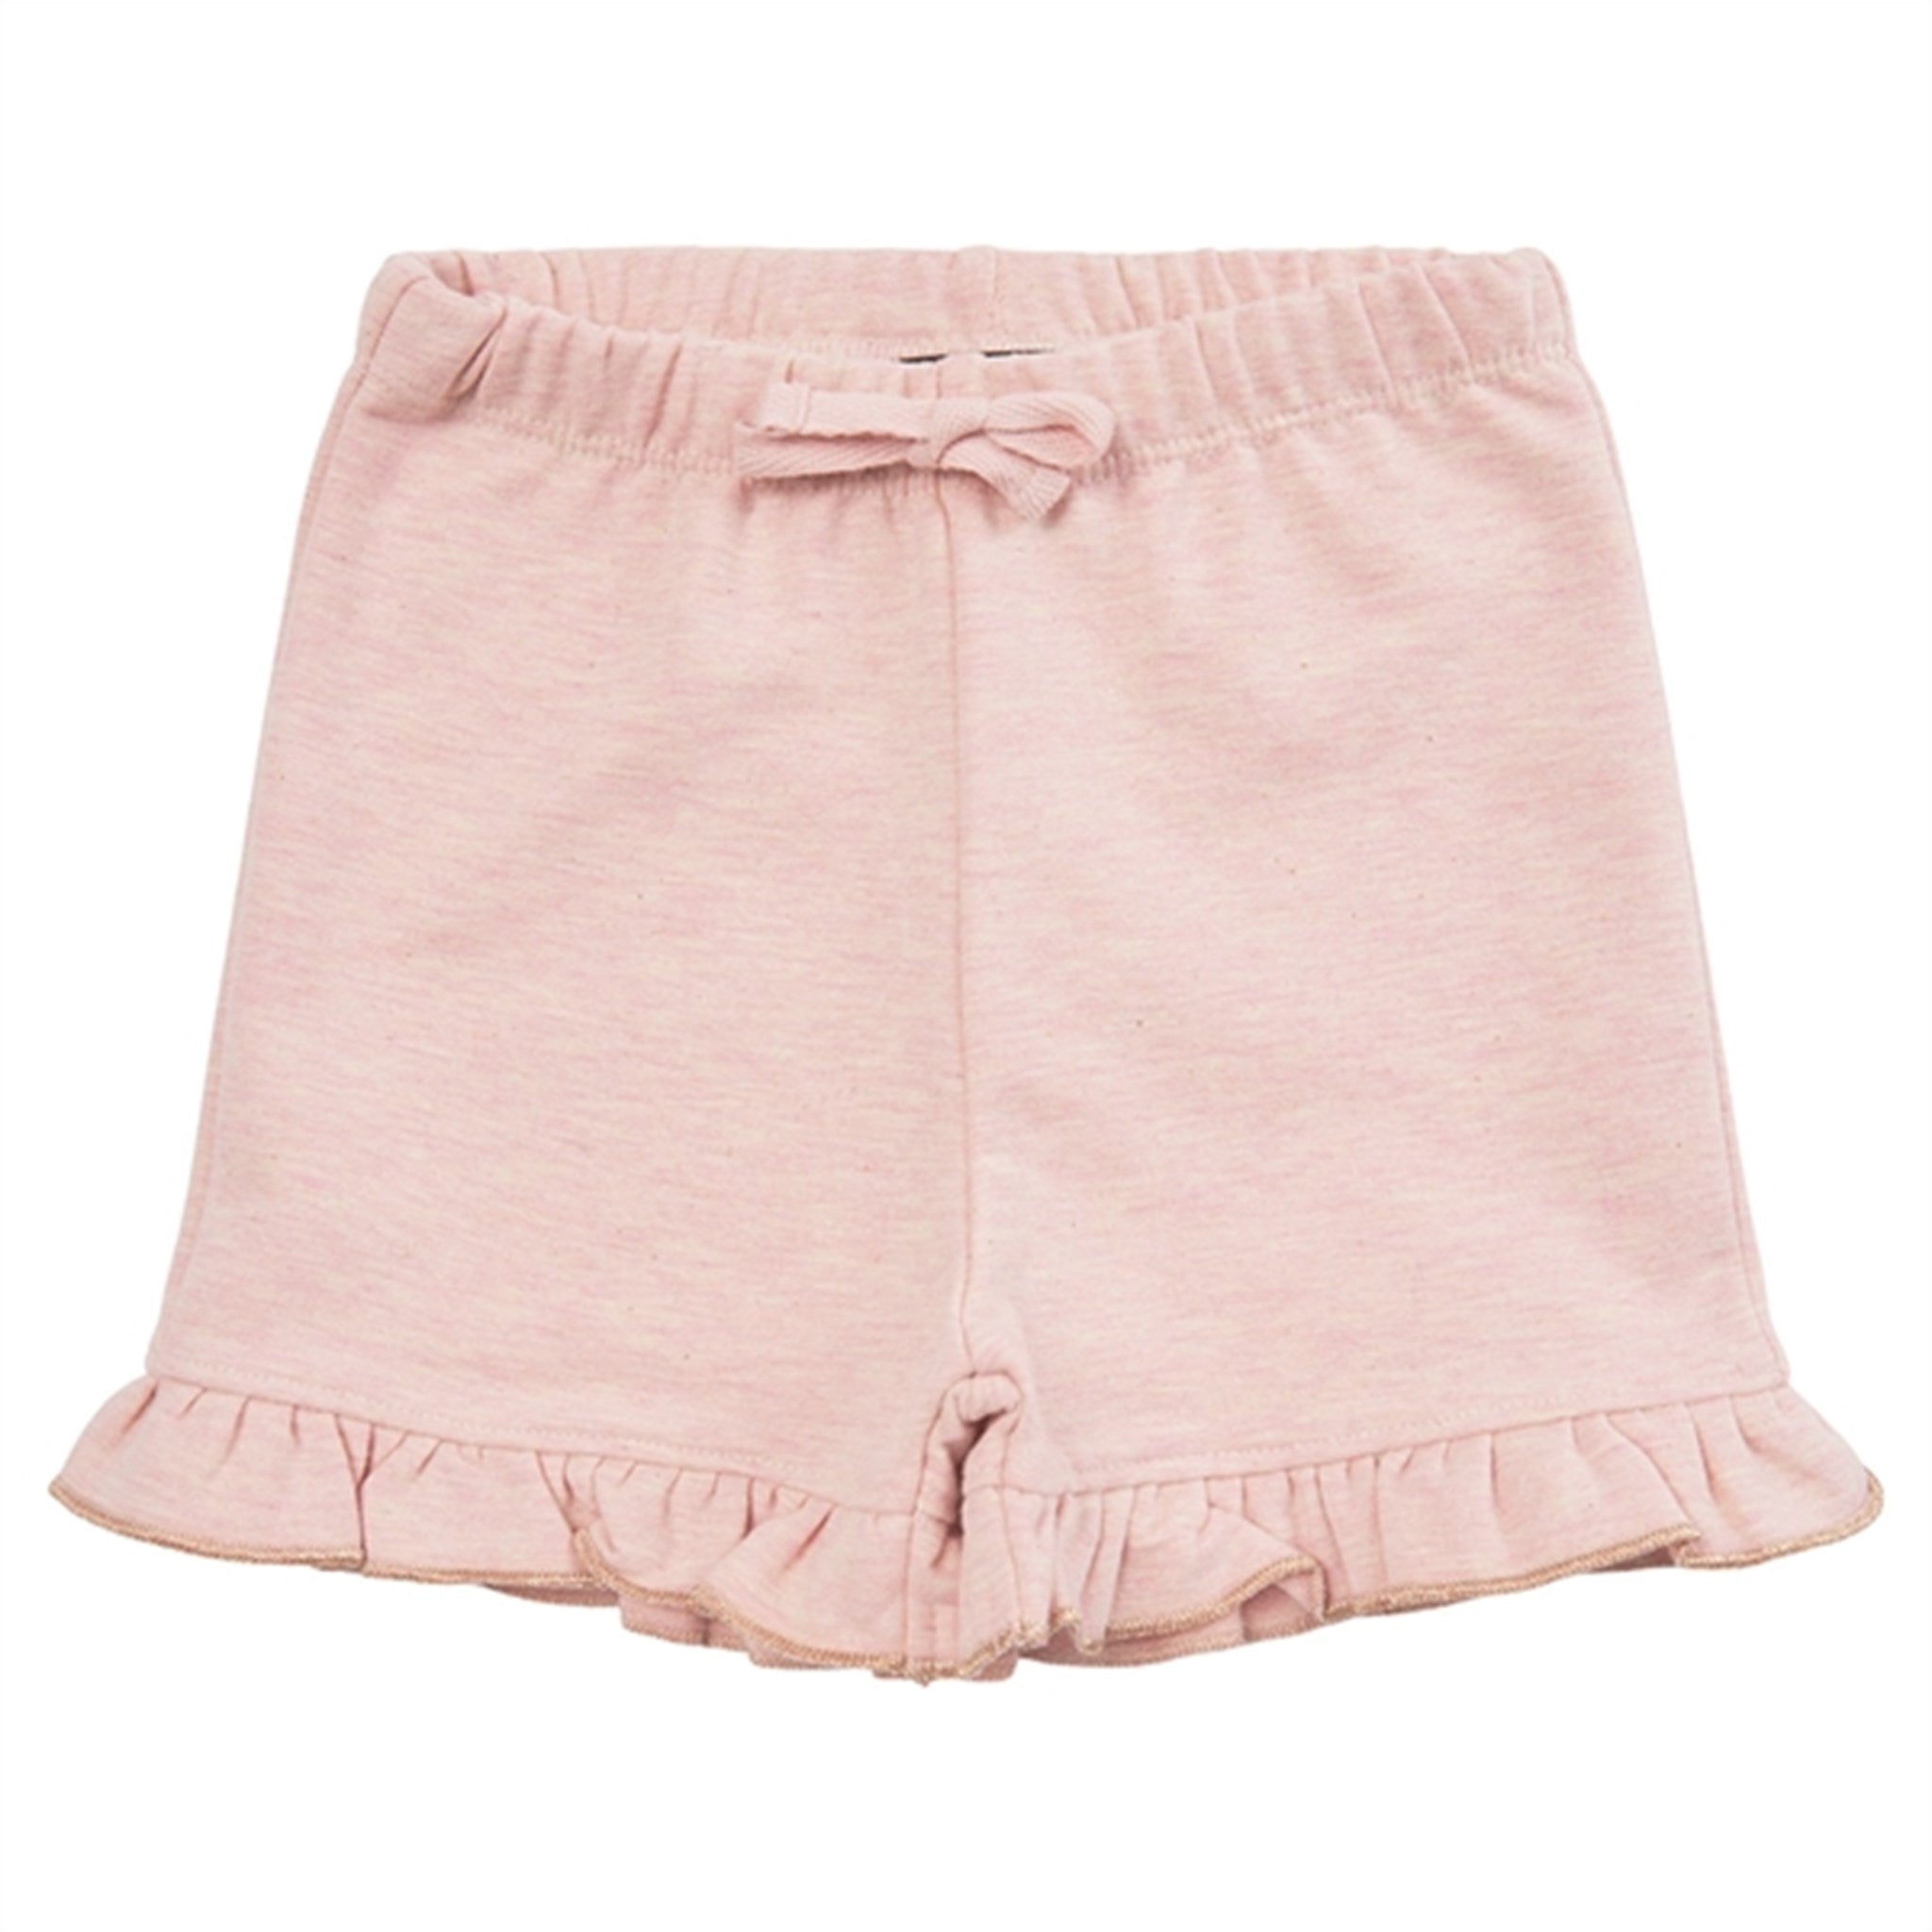 Petit by Sofie Schnoor Rose Blush Shorts